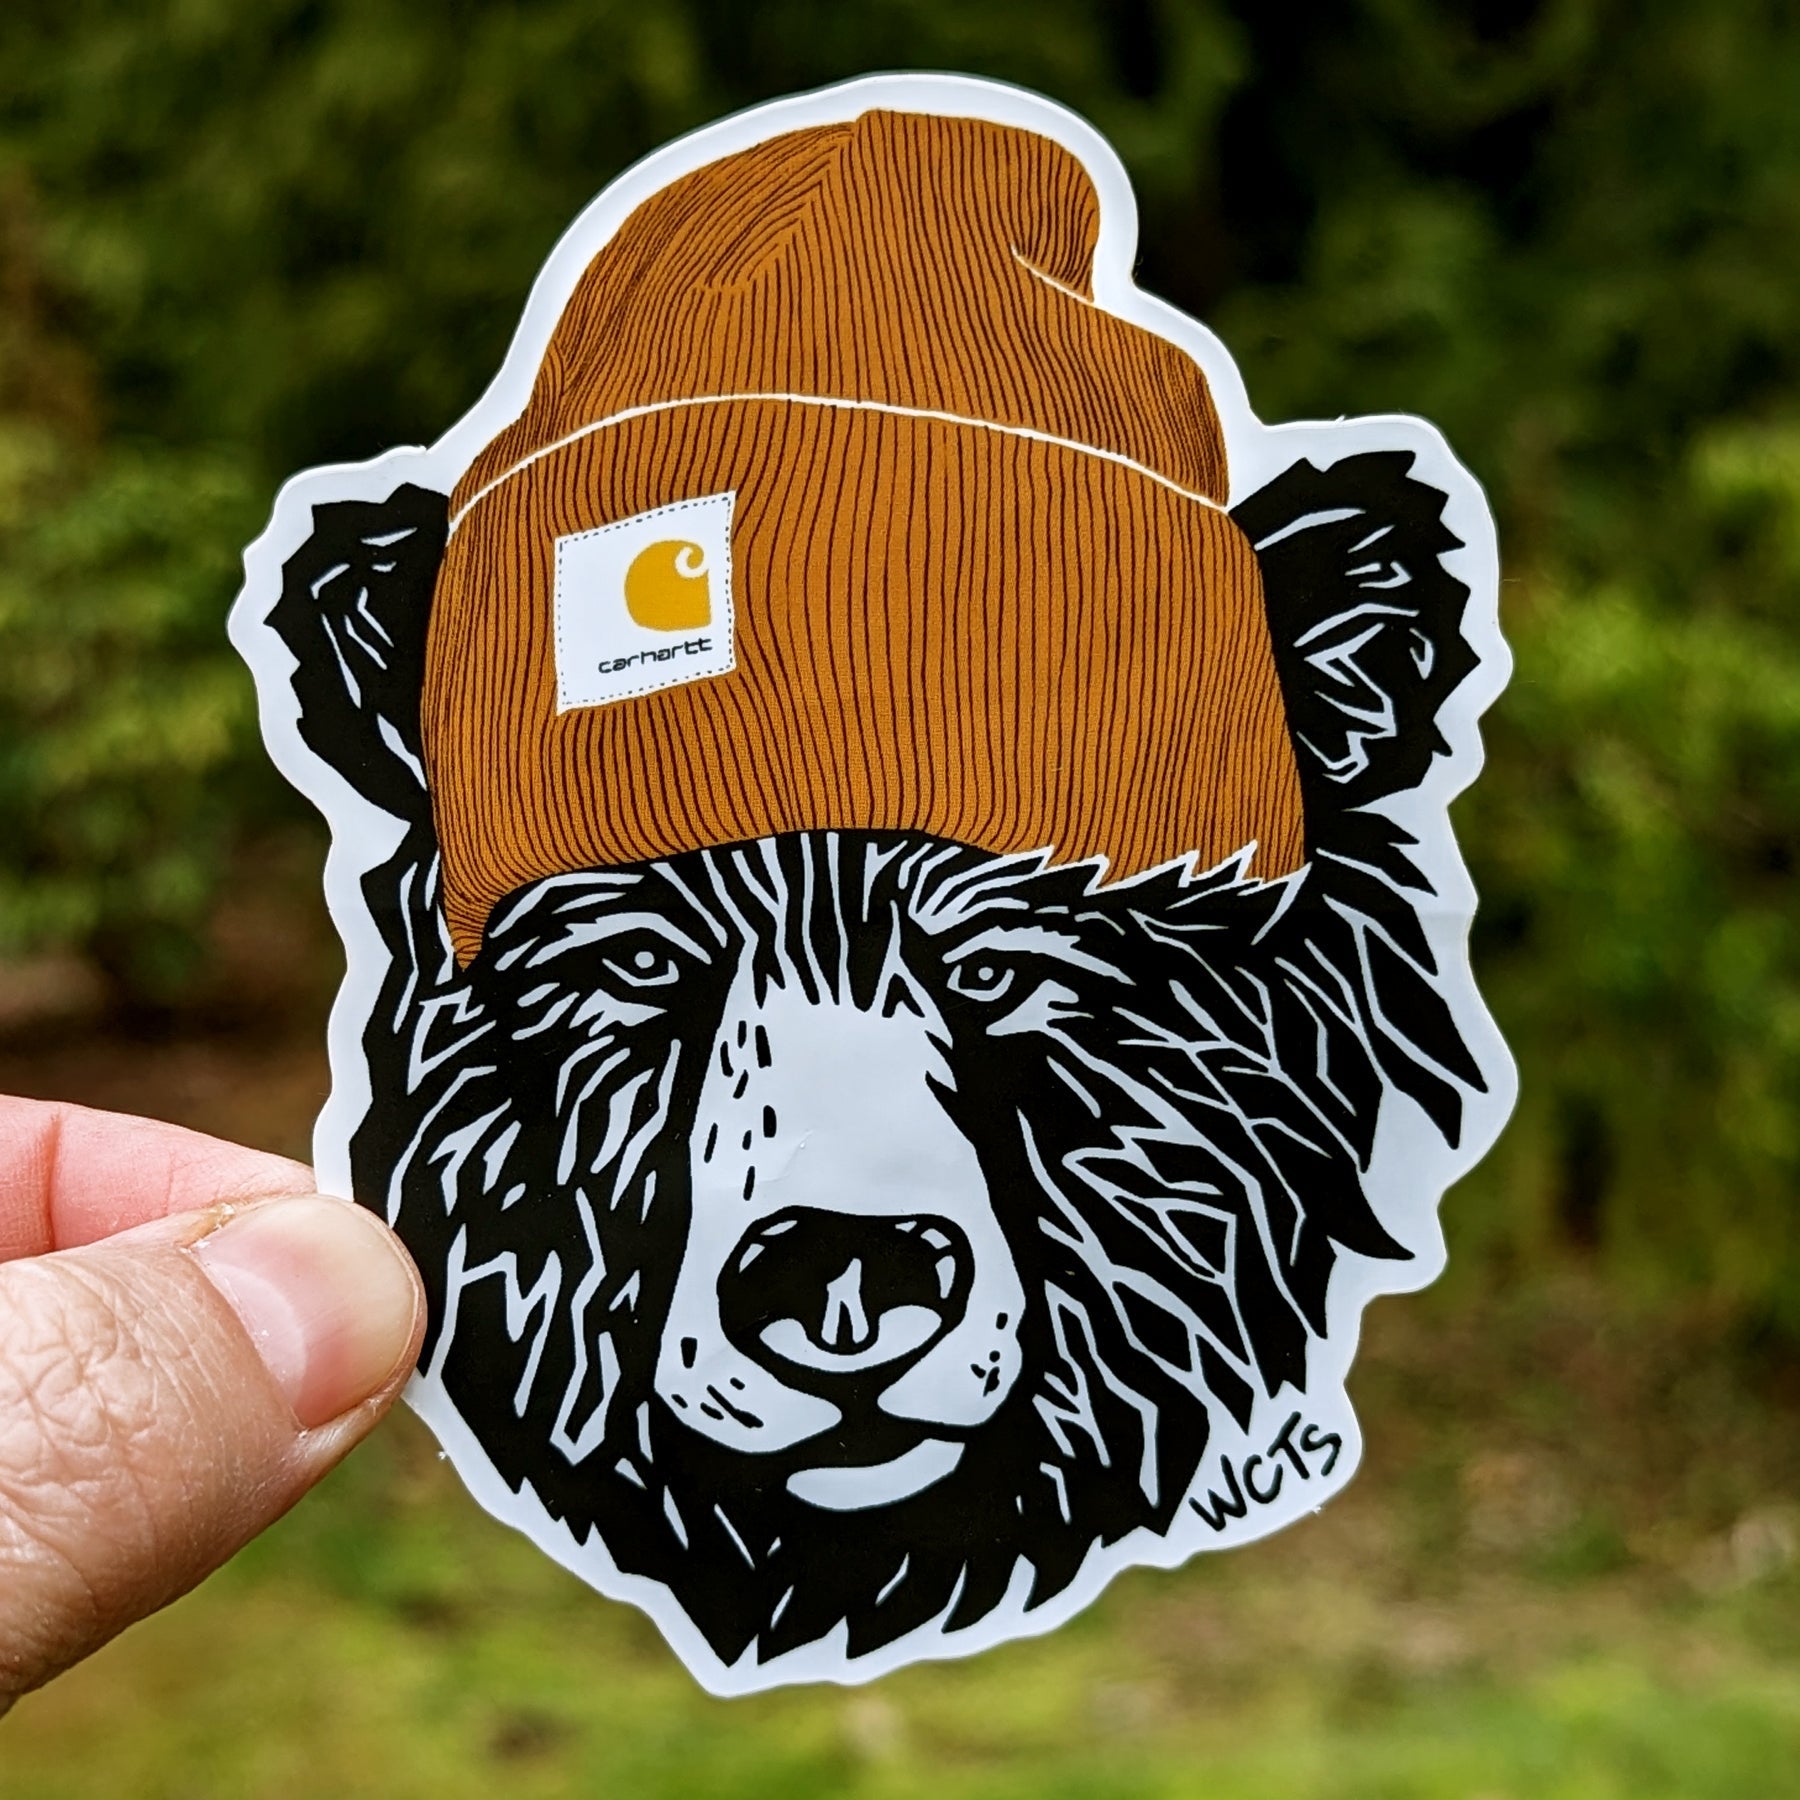 Westcoastees Touque Bear Sticker - Westcoastees Touque Bear Sticker -  - House of Himwitsa Native Art Gallery and Gifts